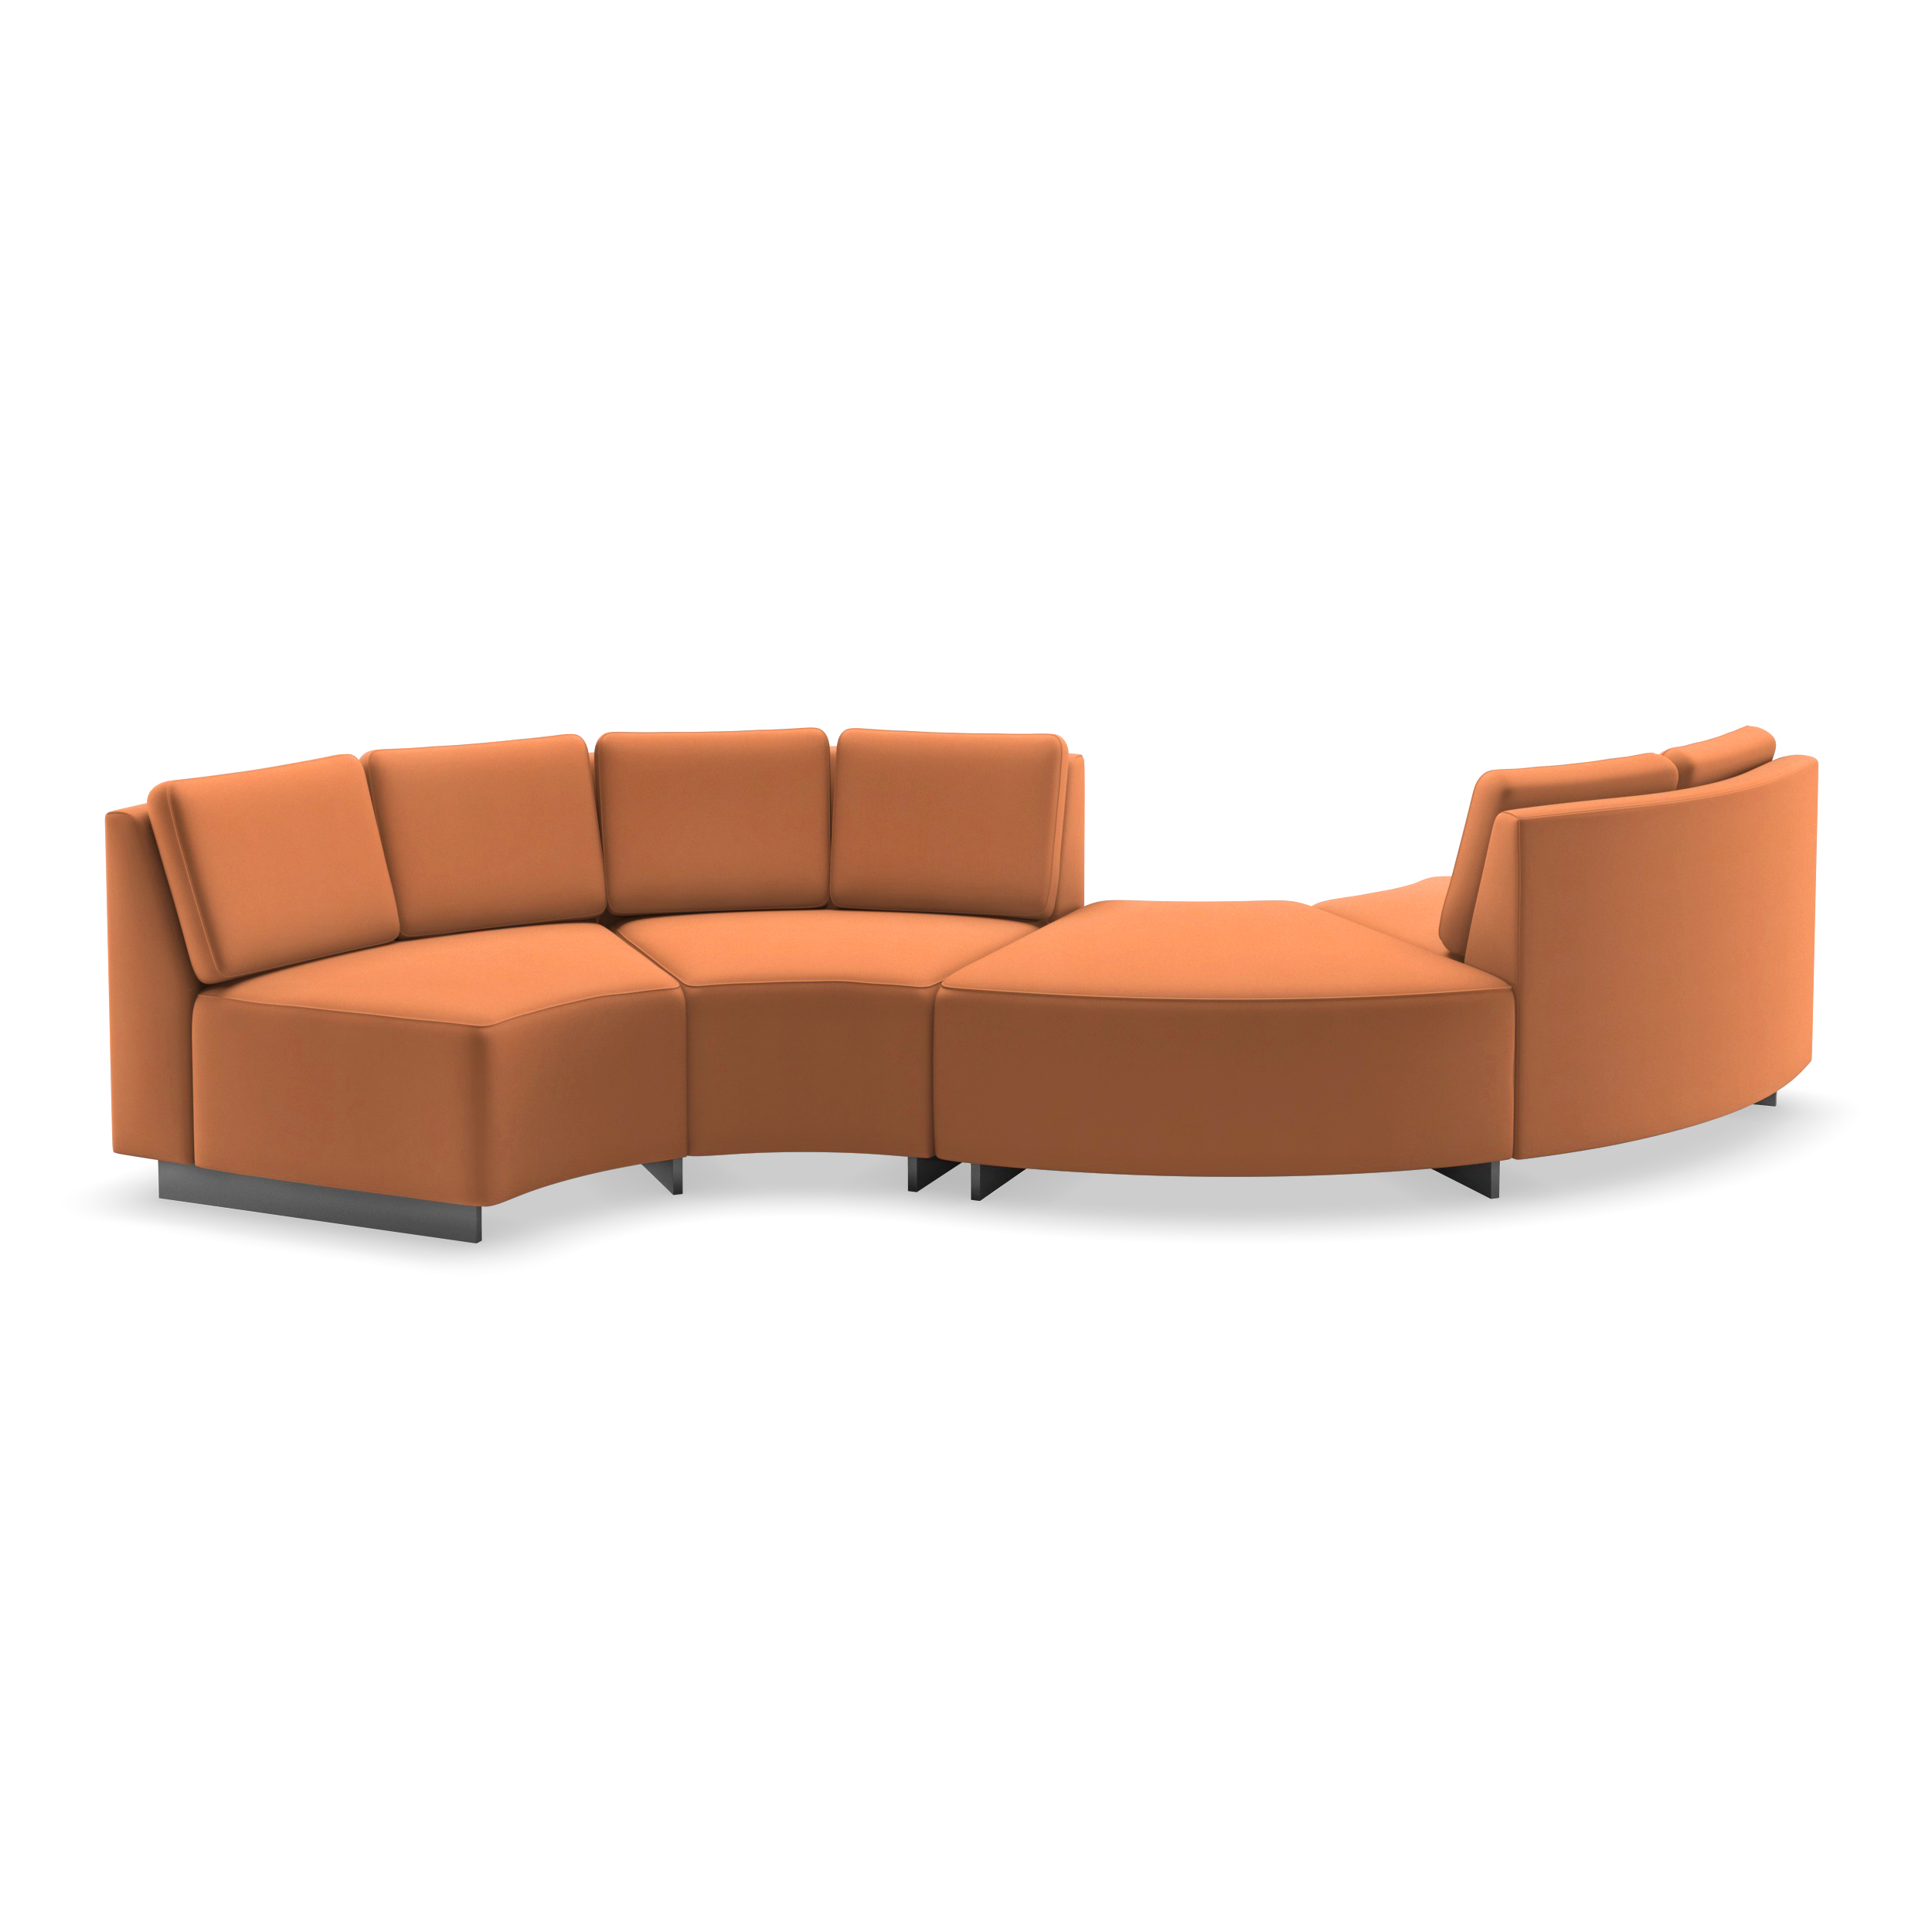 curved commercial sofa with wood sled legs and cushions